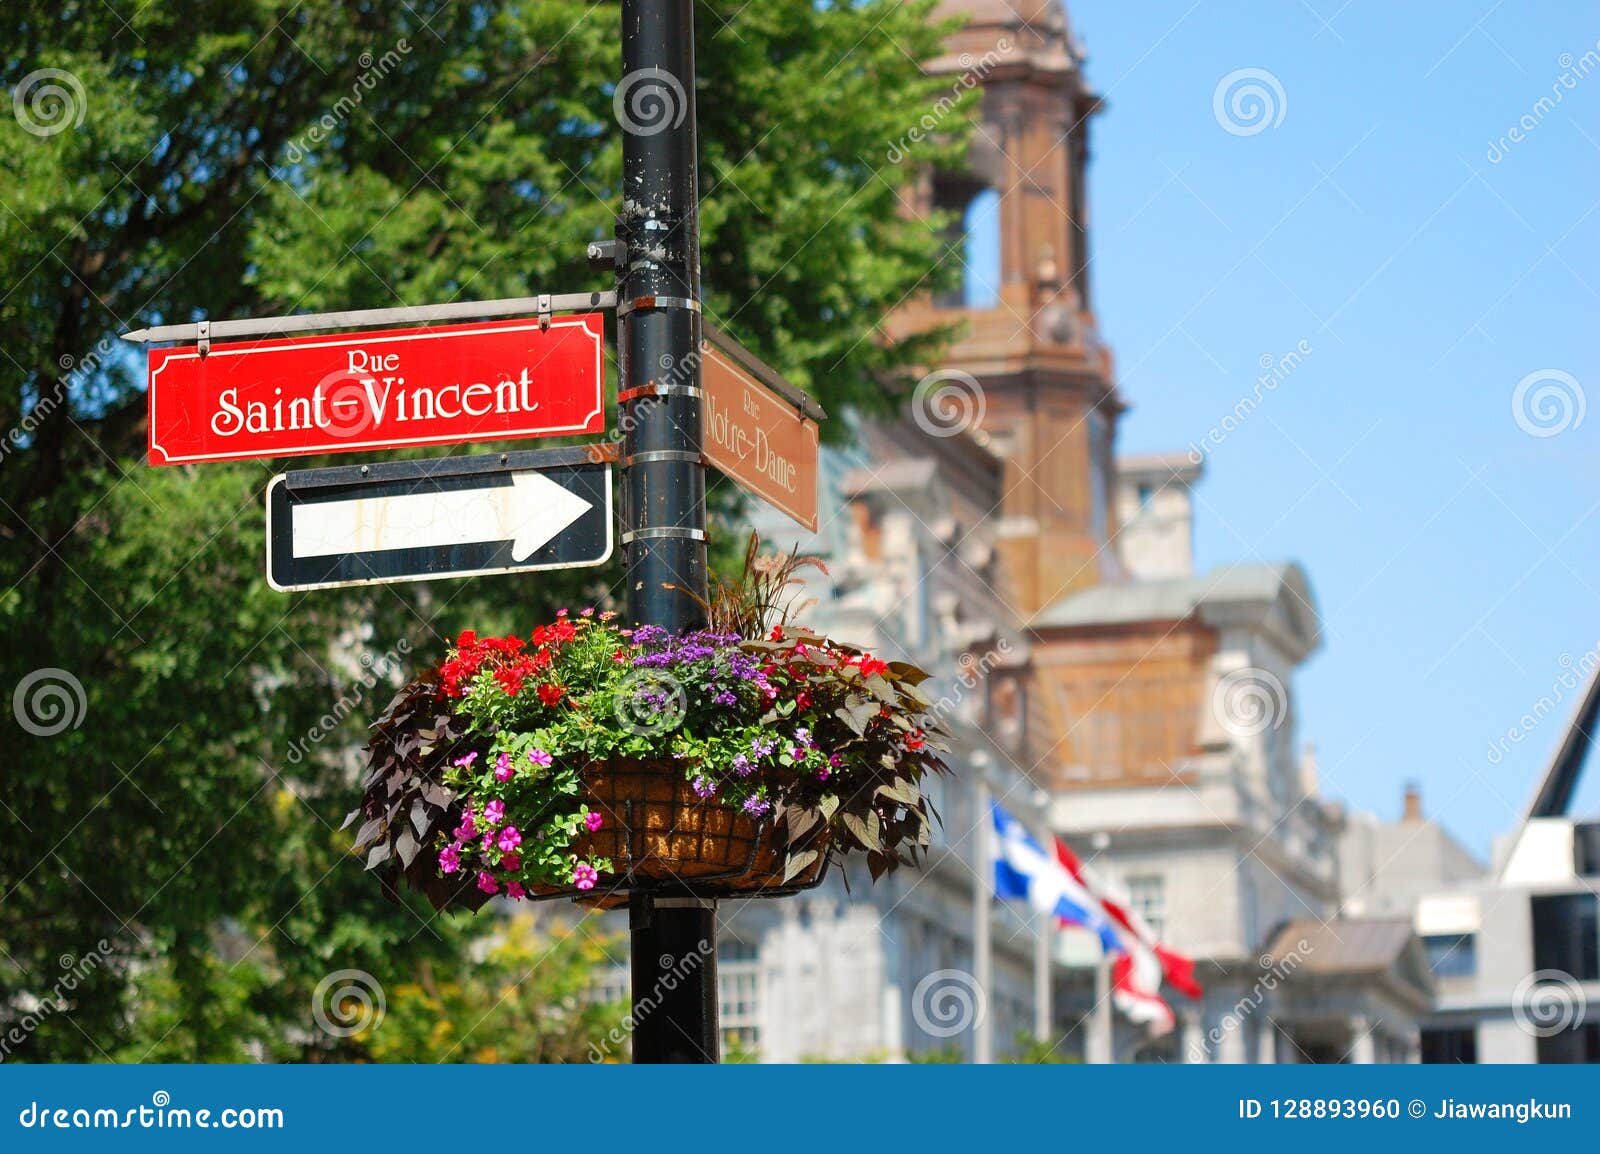 saint vincent street in old montreal, quebec, canada